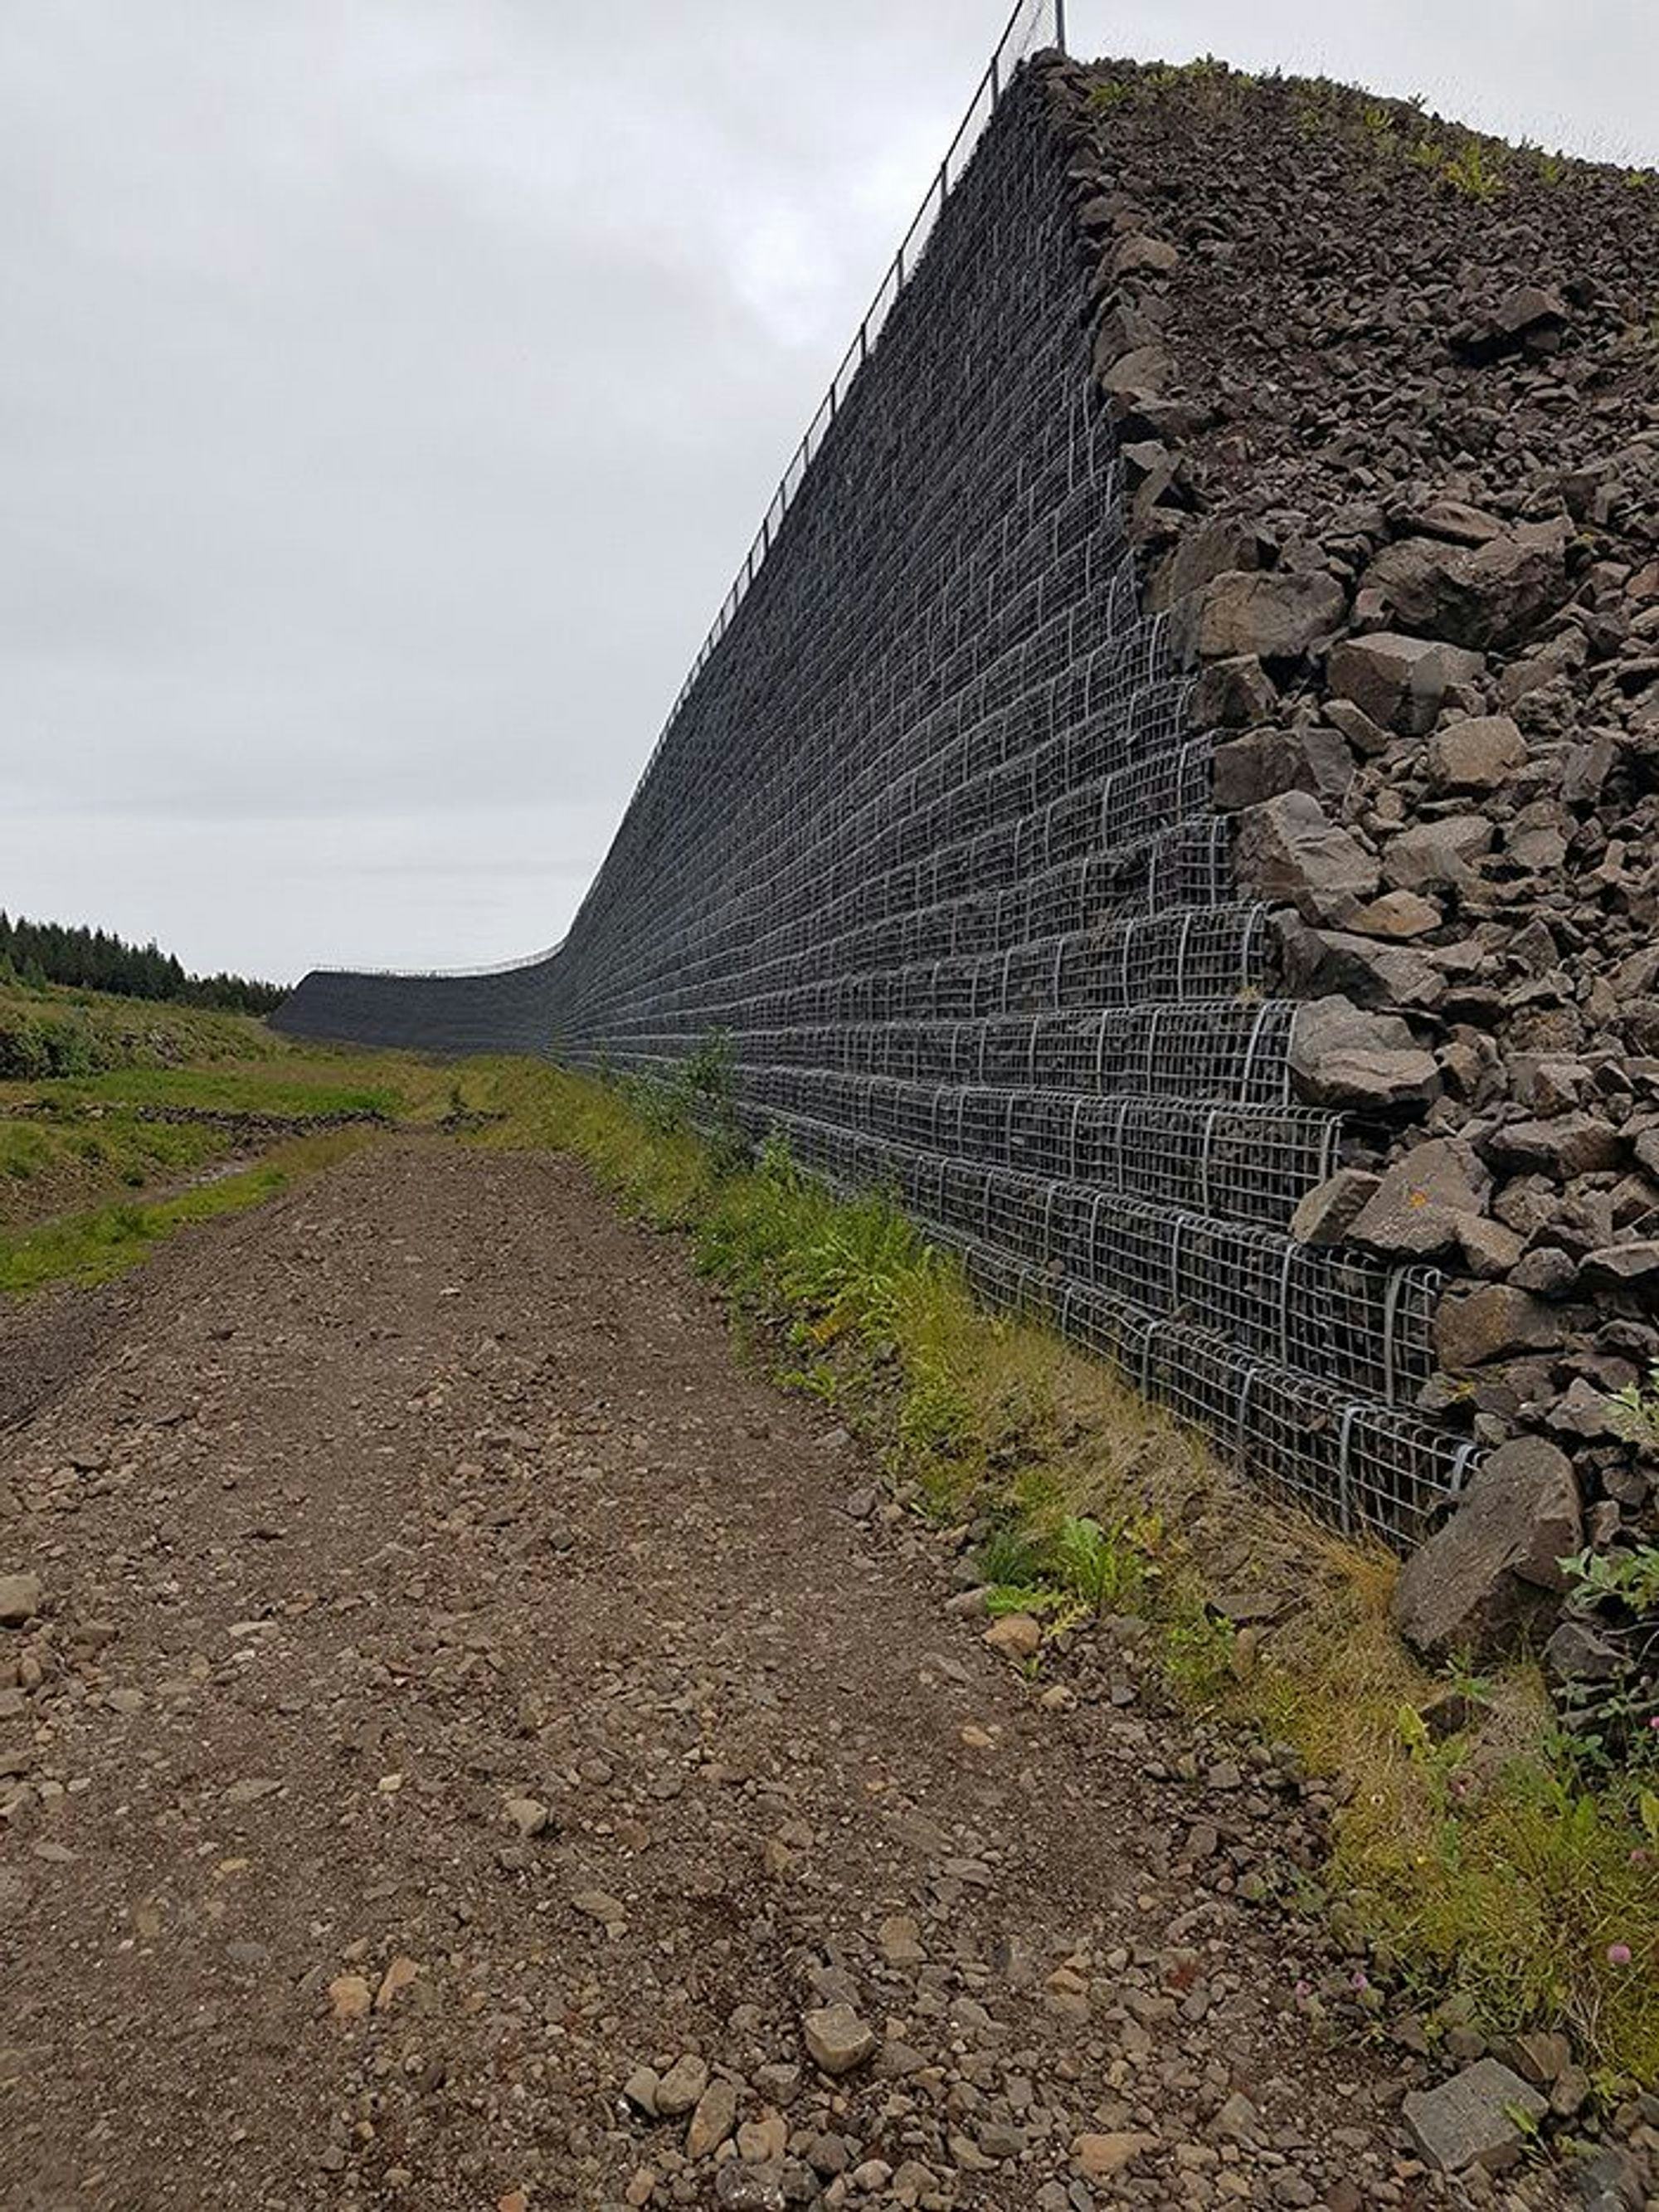 A wall made of wire mesh and filled with rock appeared as a barrier 